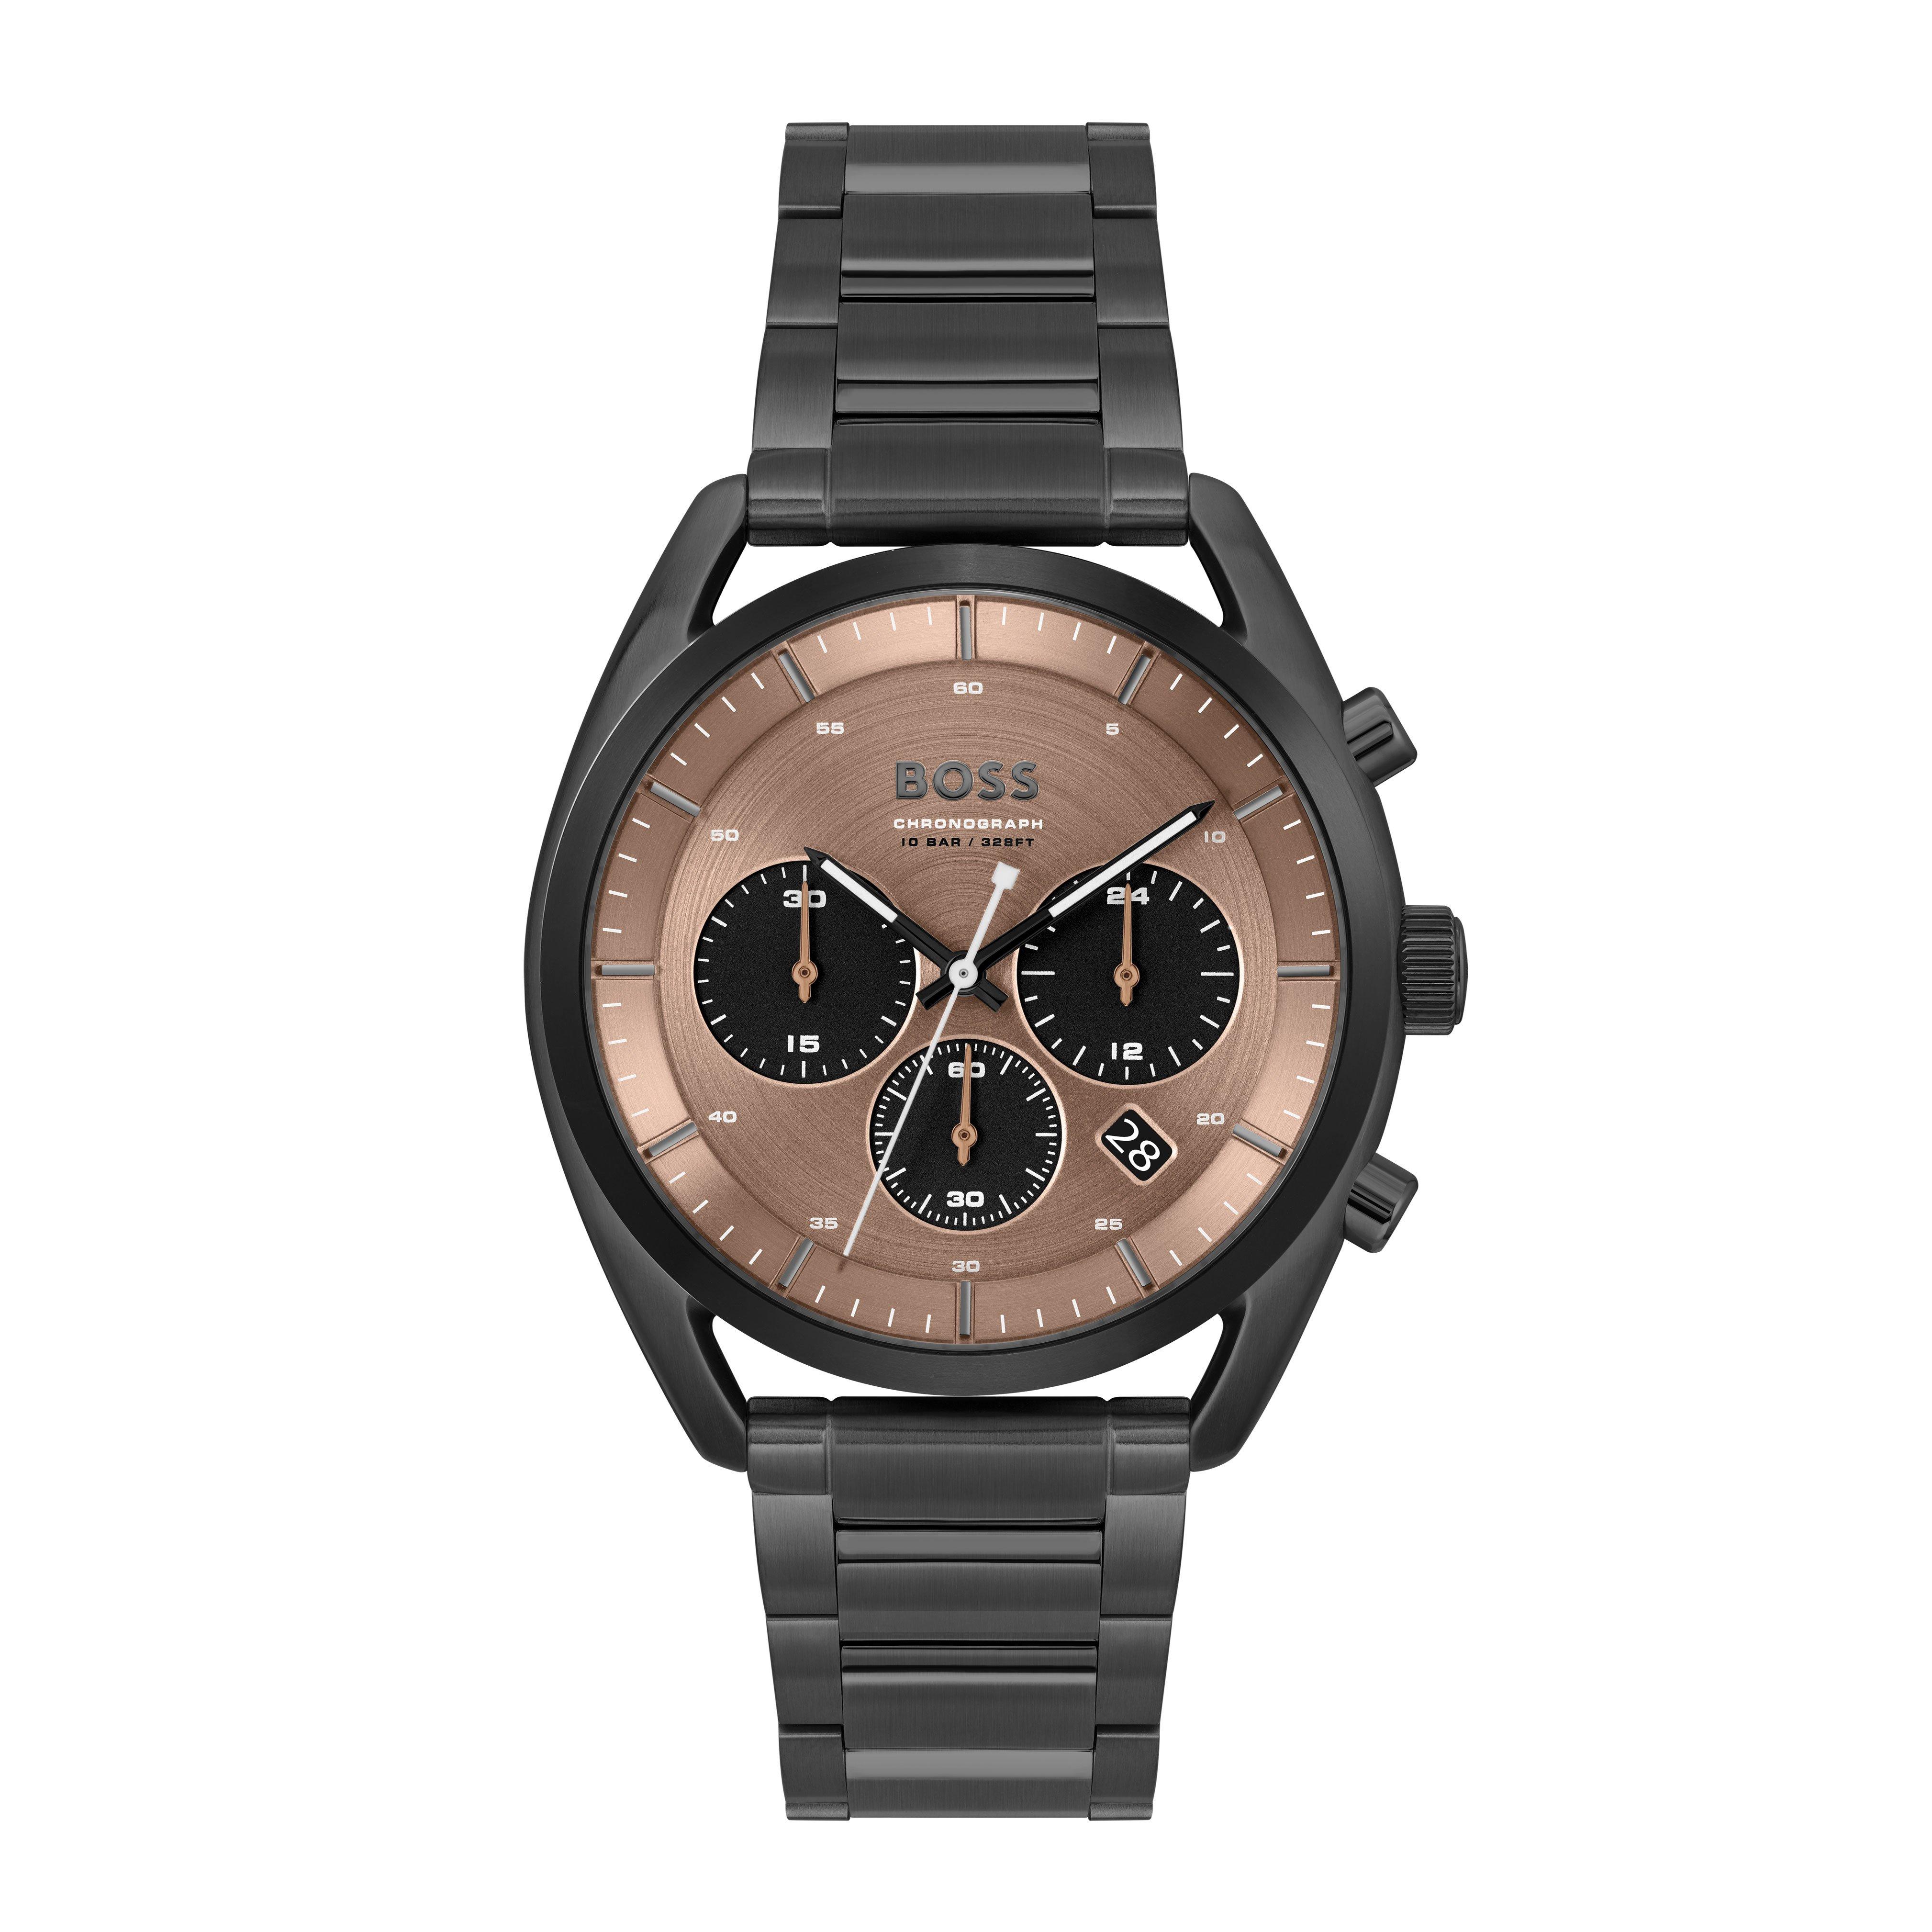 BOSS Top Stainless Steel Chronograph Men’s Watch 1514095 | 44 mm, Brown ...